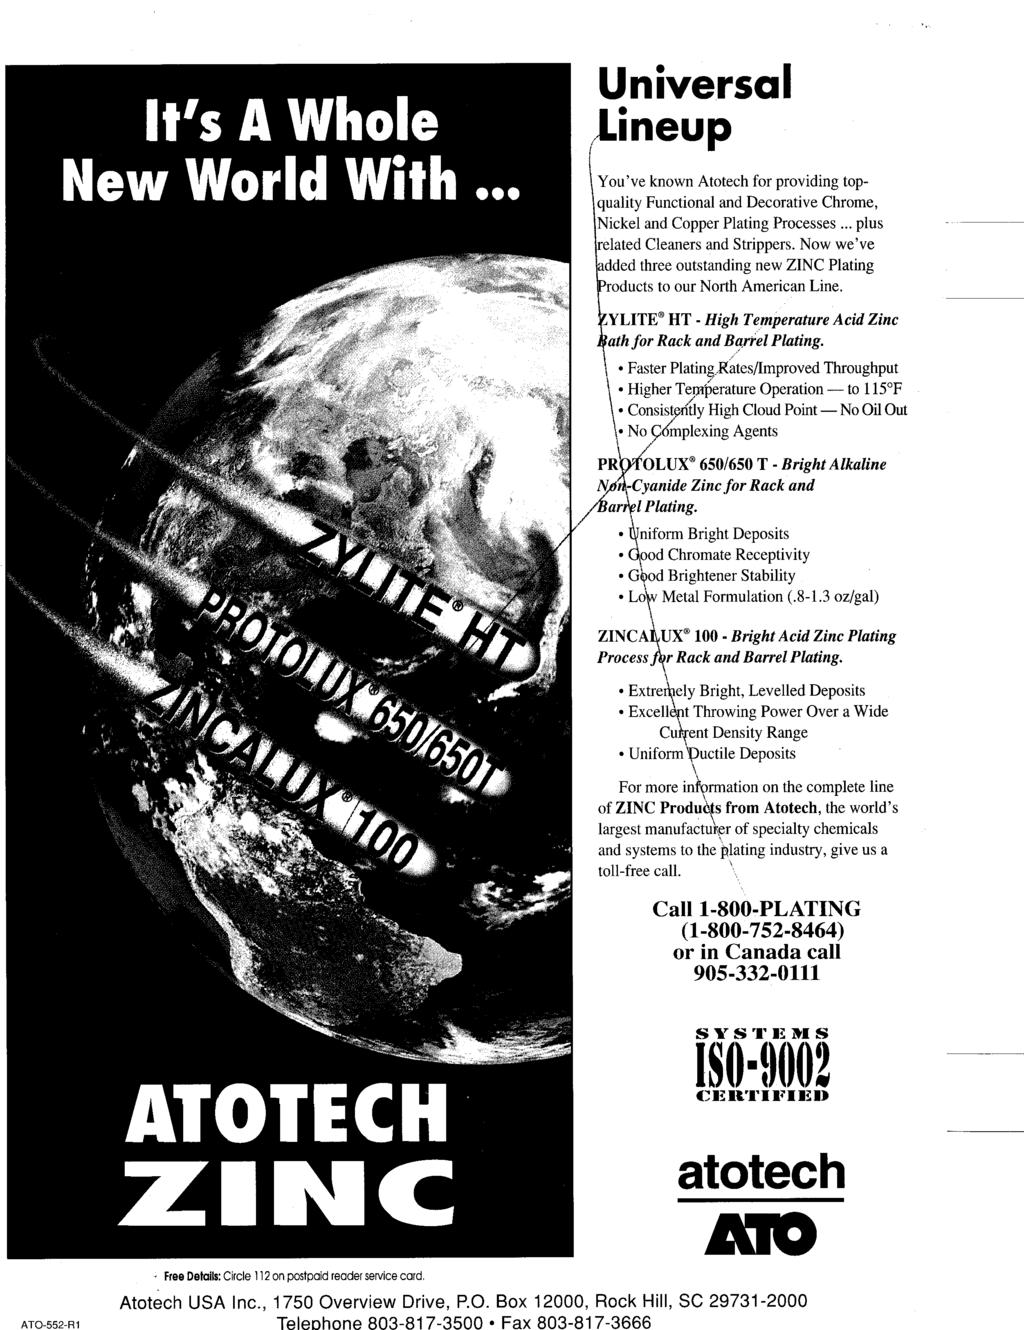 ATO-552-R1 Atotech USA Inc., 1750 Overview Drive, P.O. Box 12000, Rock Hill, SC 29731-2000 Telenhnne 803-81 7-3500 Fax 803-81 7-3666 @ 100 U n ive rsa I lineup You ve known Atotech for providing